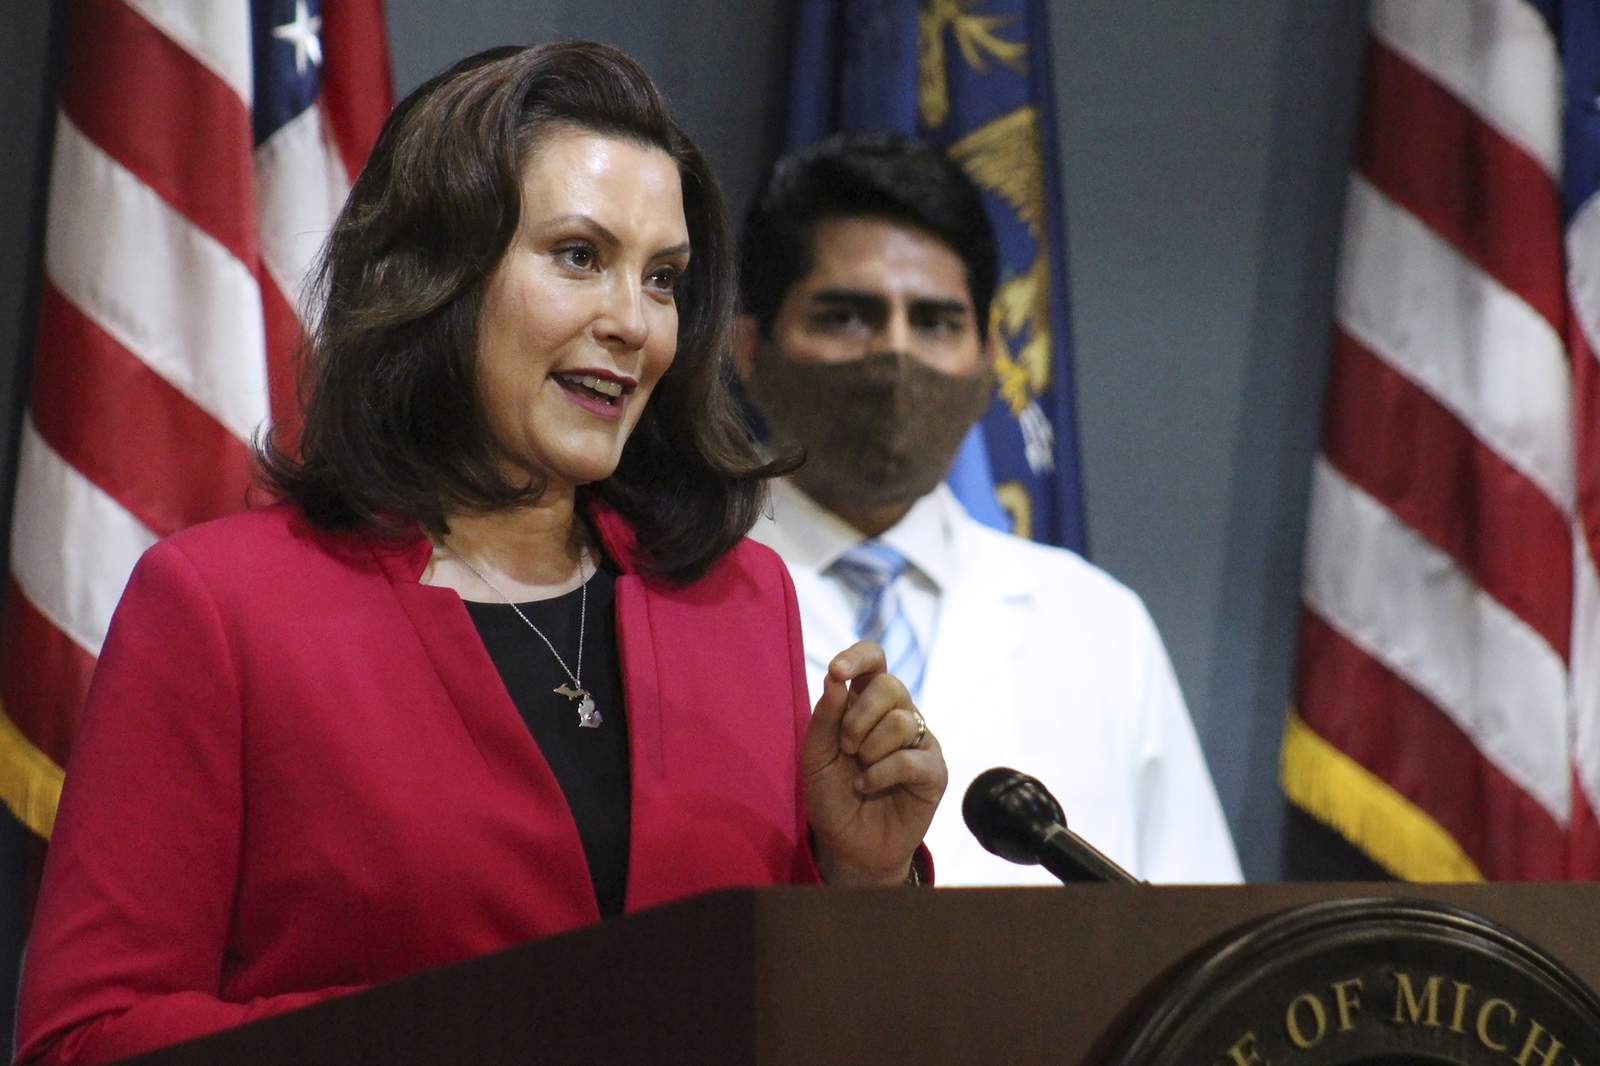 Michigan Gov. Whitmer signs order ensuring workers compensation eligibility for COVID-19 frontline workers